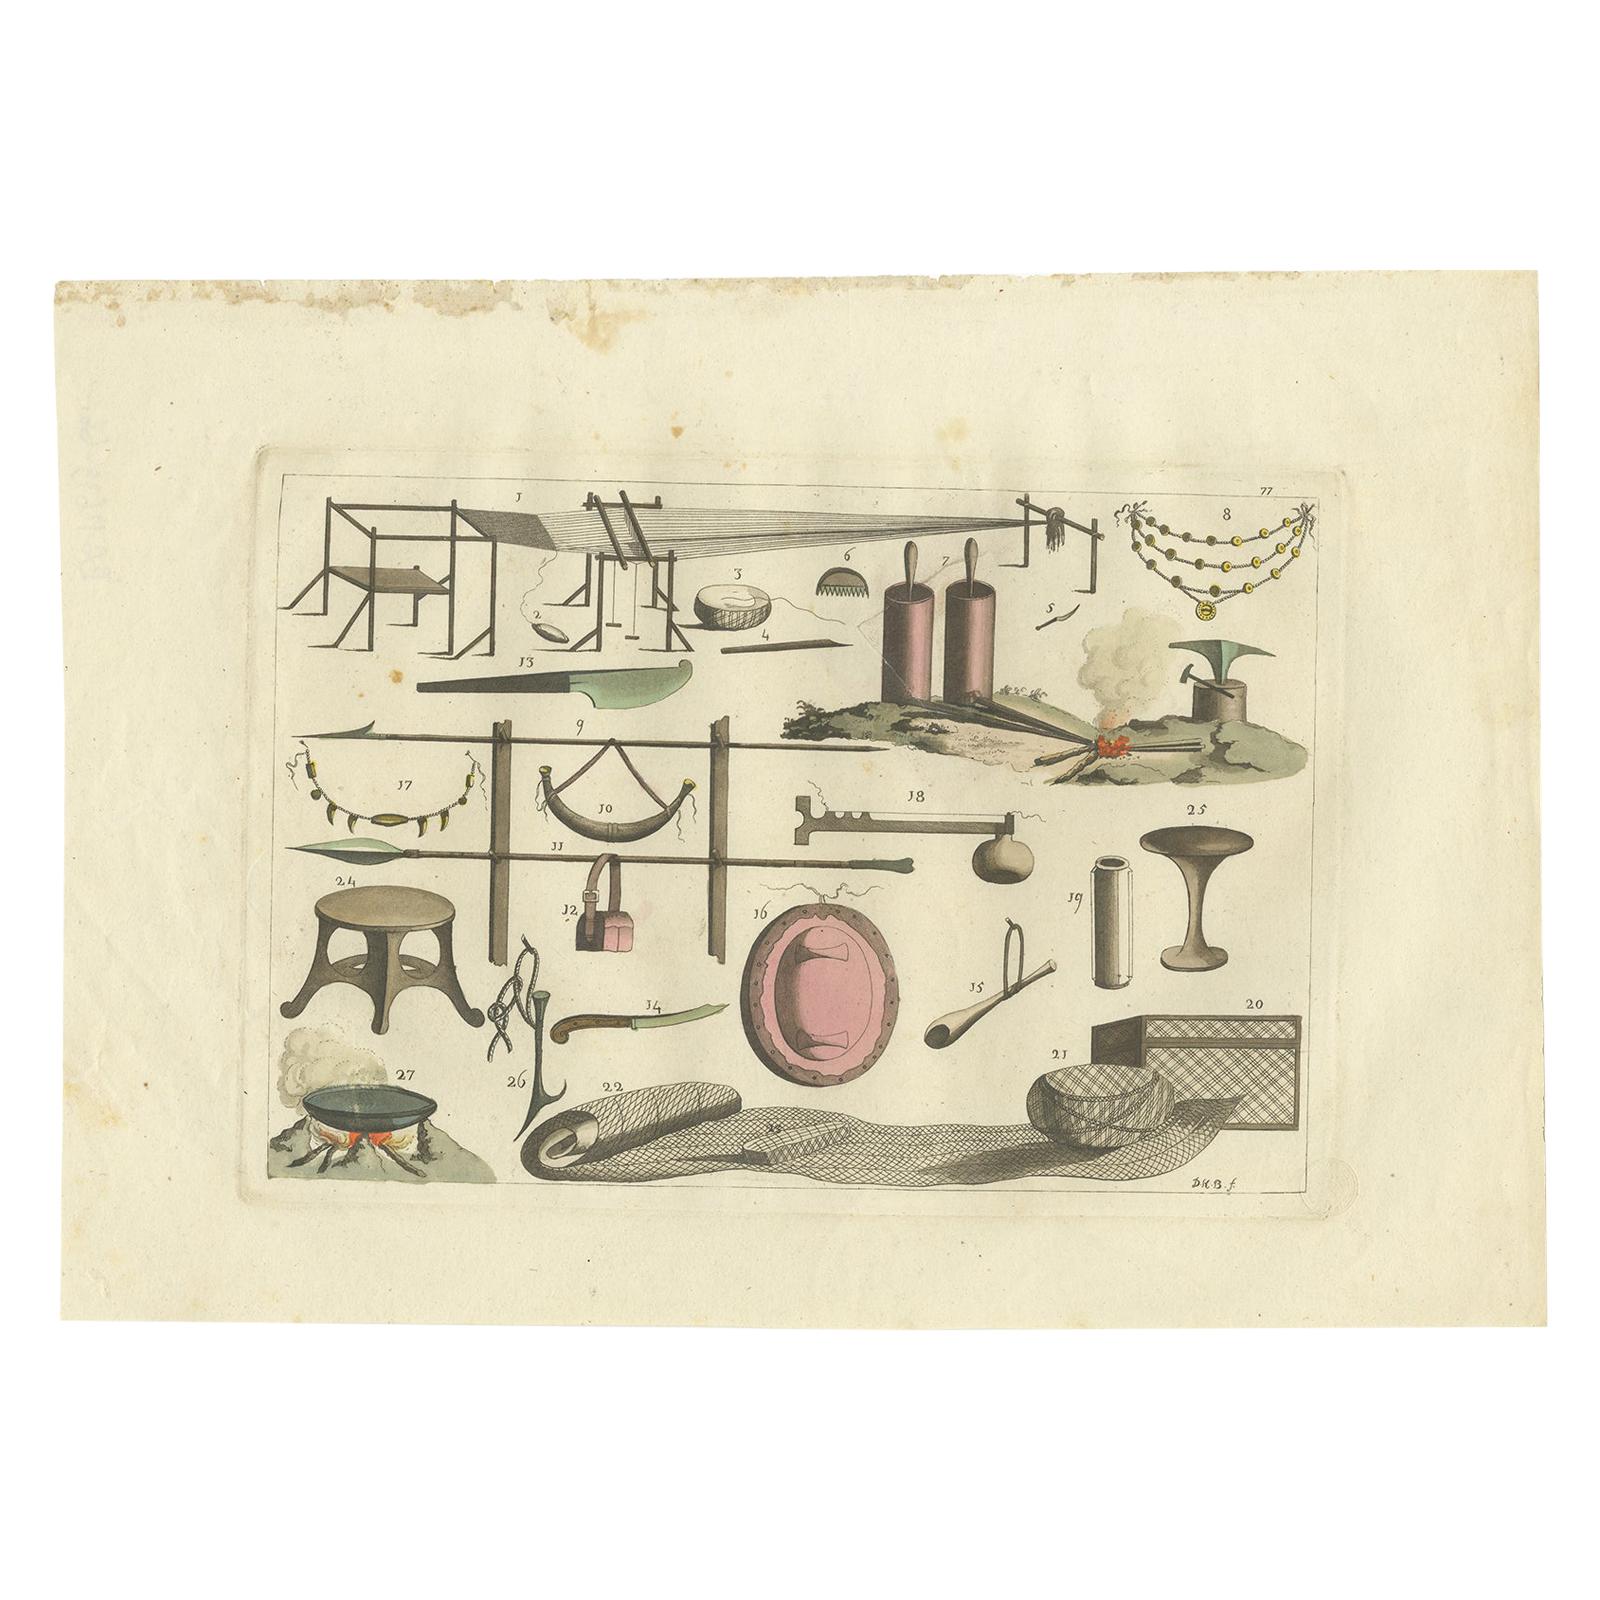 Antique Print of Various Tools and Utensils by Ferrario '1831'